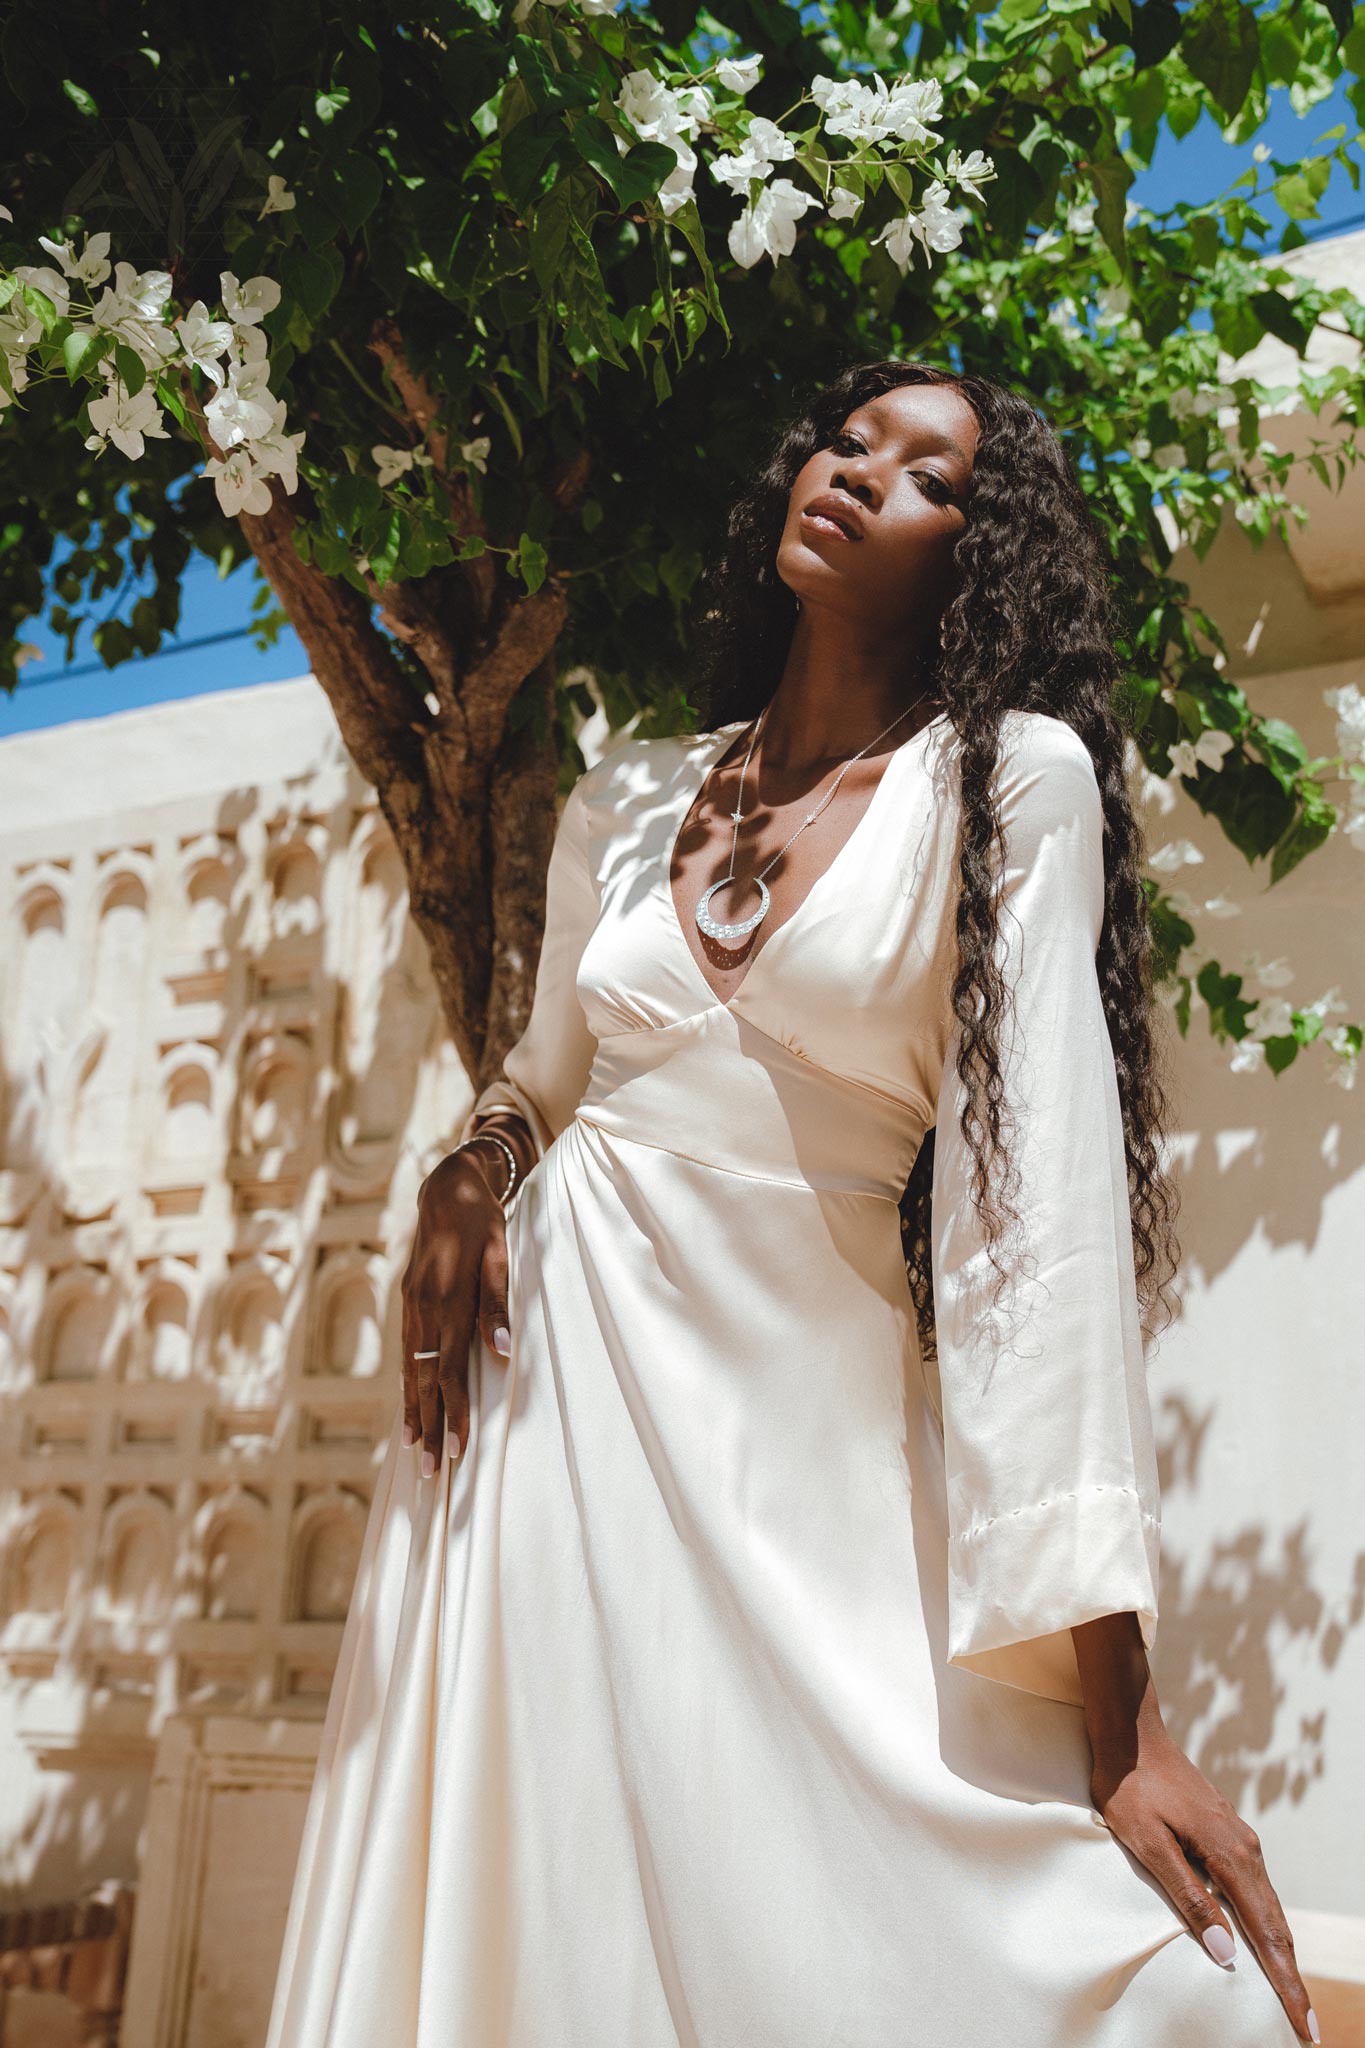 Stand out on your special day with this off-white bridal dress, featuring alluring bell sleeves and an open back silhouette, embodying bohemian grace.